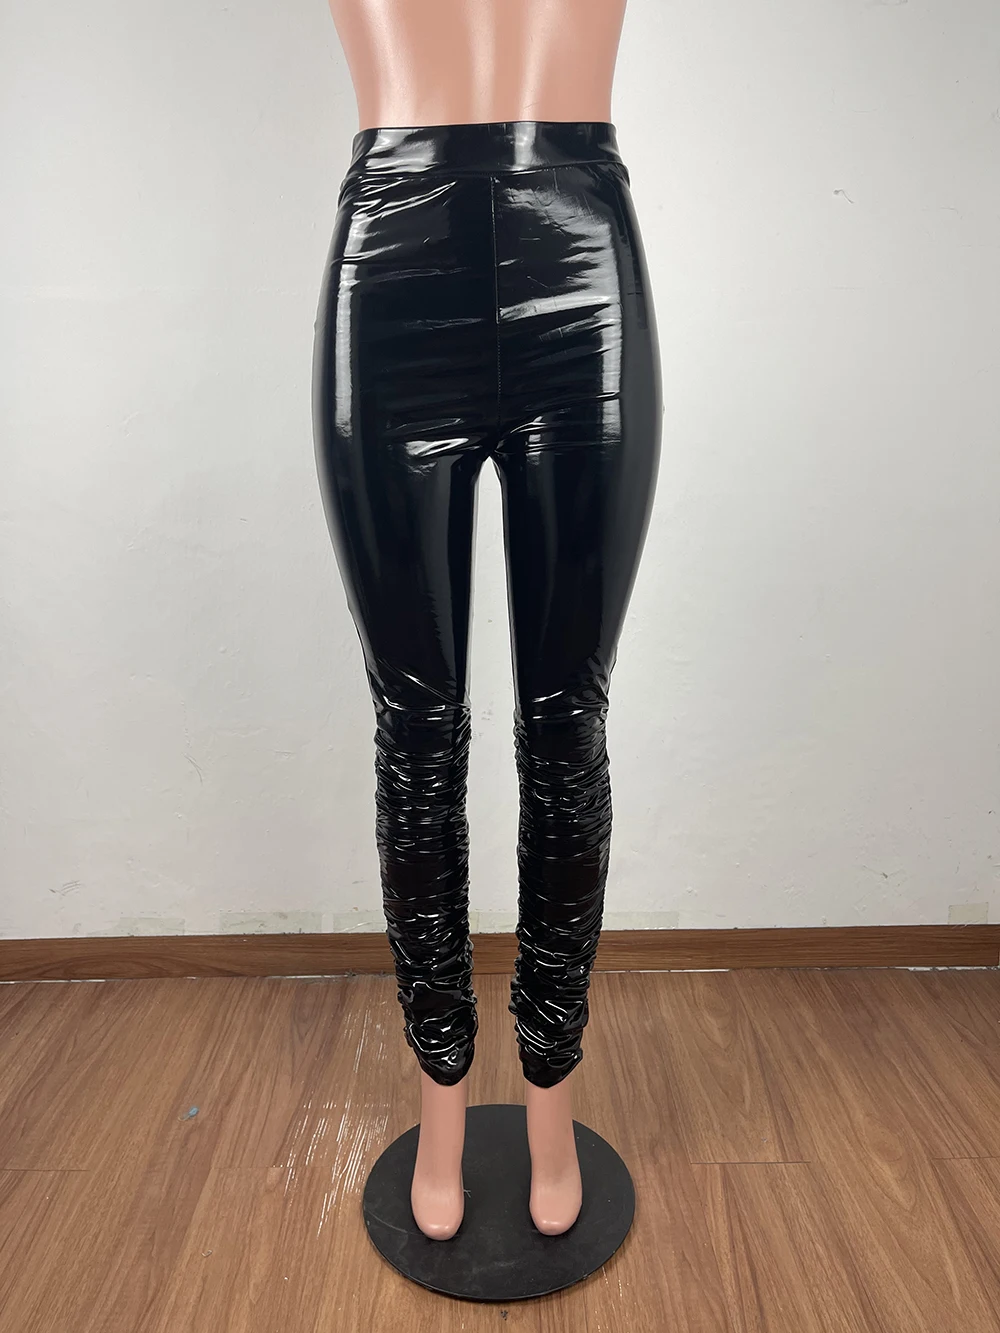 Women's Casual Hot Sale Distressed Hollow Out High Waist Bodycon Pants Long PU leather pants